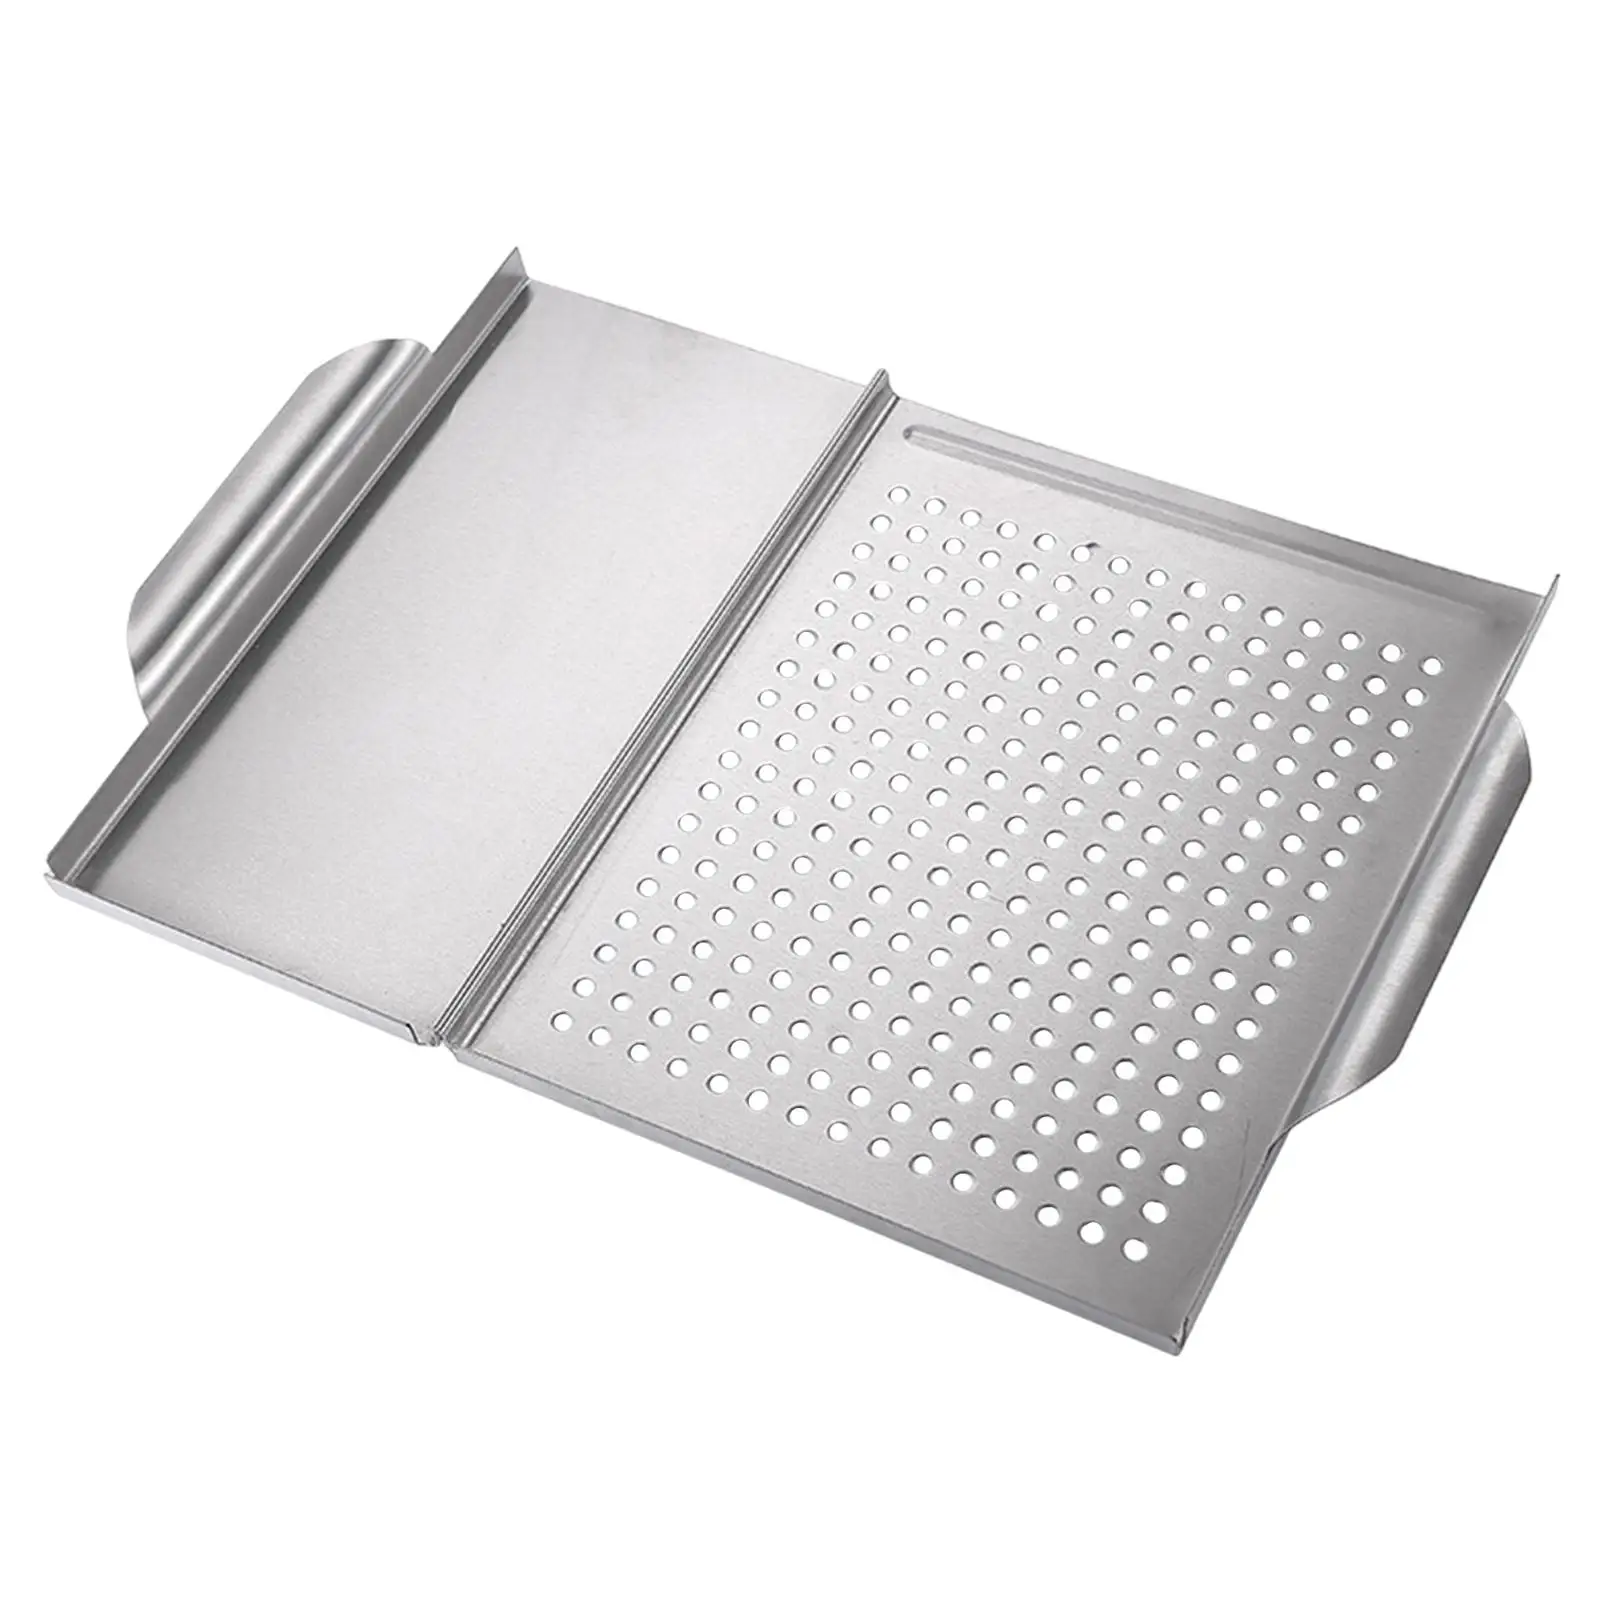 Nonstick Grill Basket with Holes Stainless Steel Grill Topper Grid BBQ Grill Tray for Outdoor Camping Gas Grills Oven Cooking